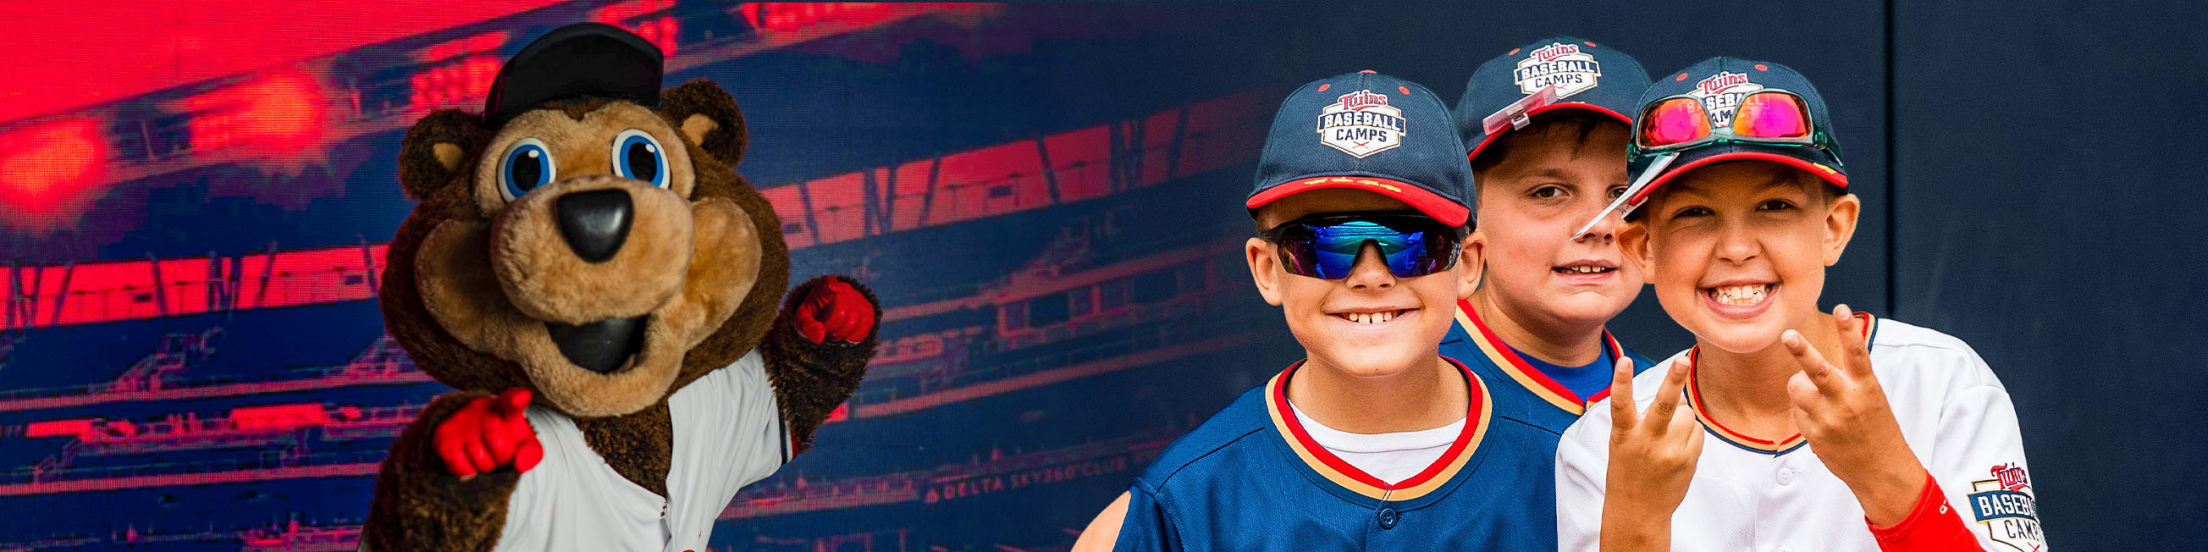 Minnesota Twins - As part of Kids Appreciation Day, these